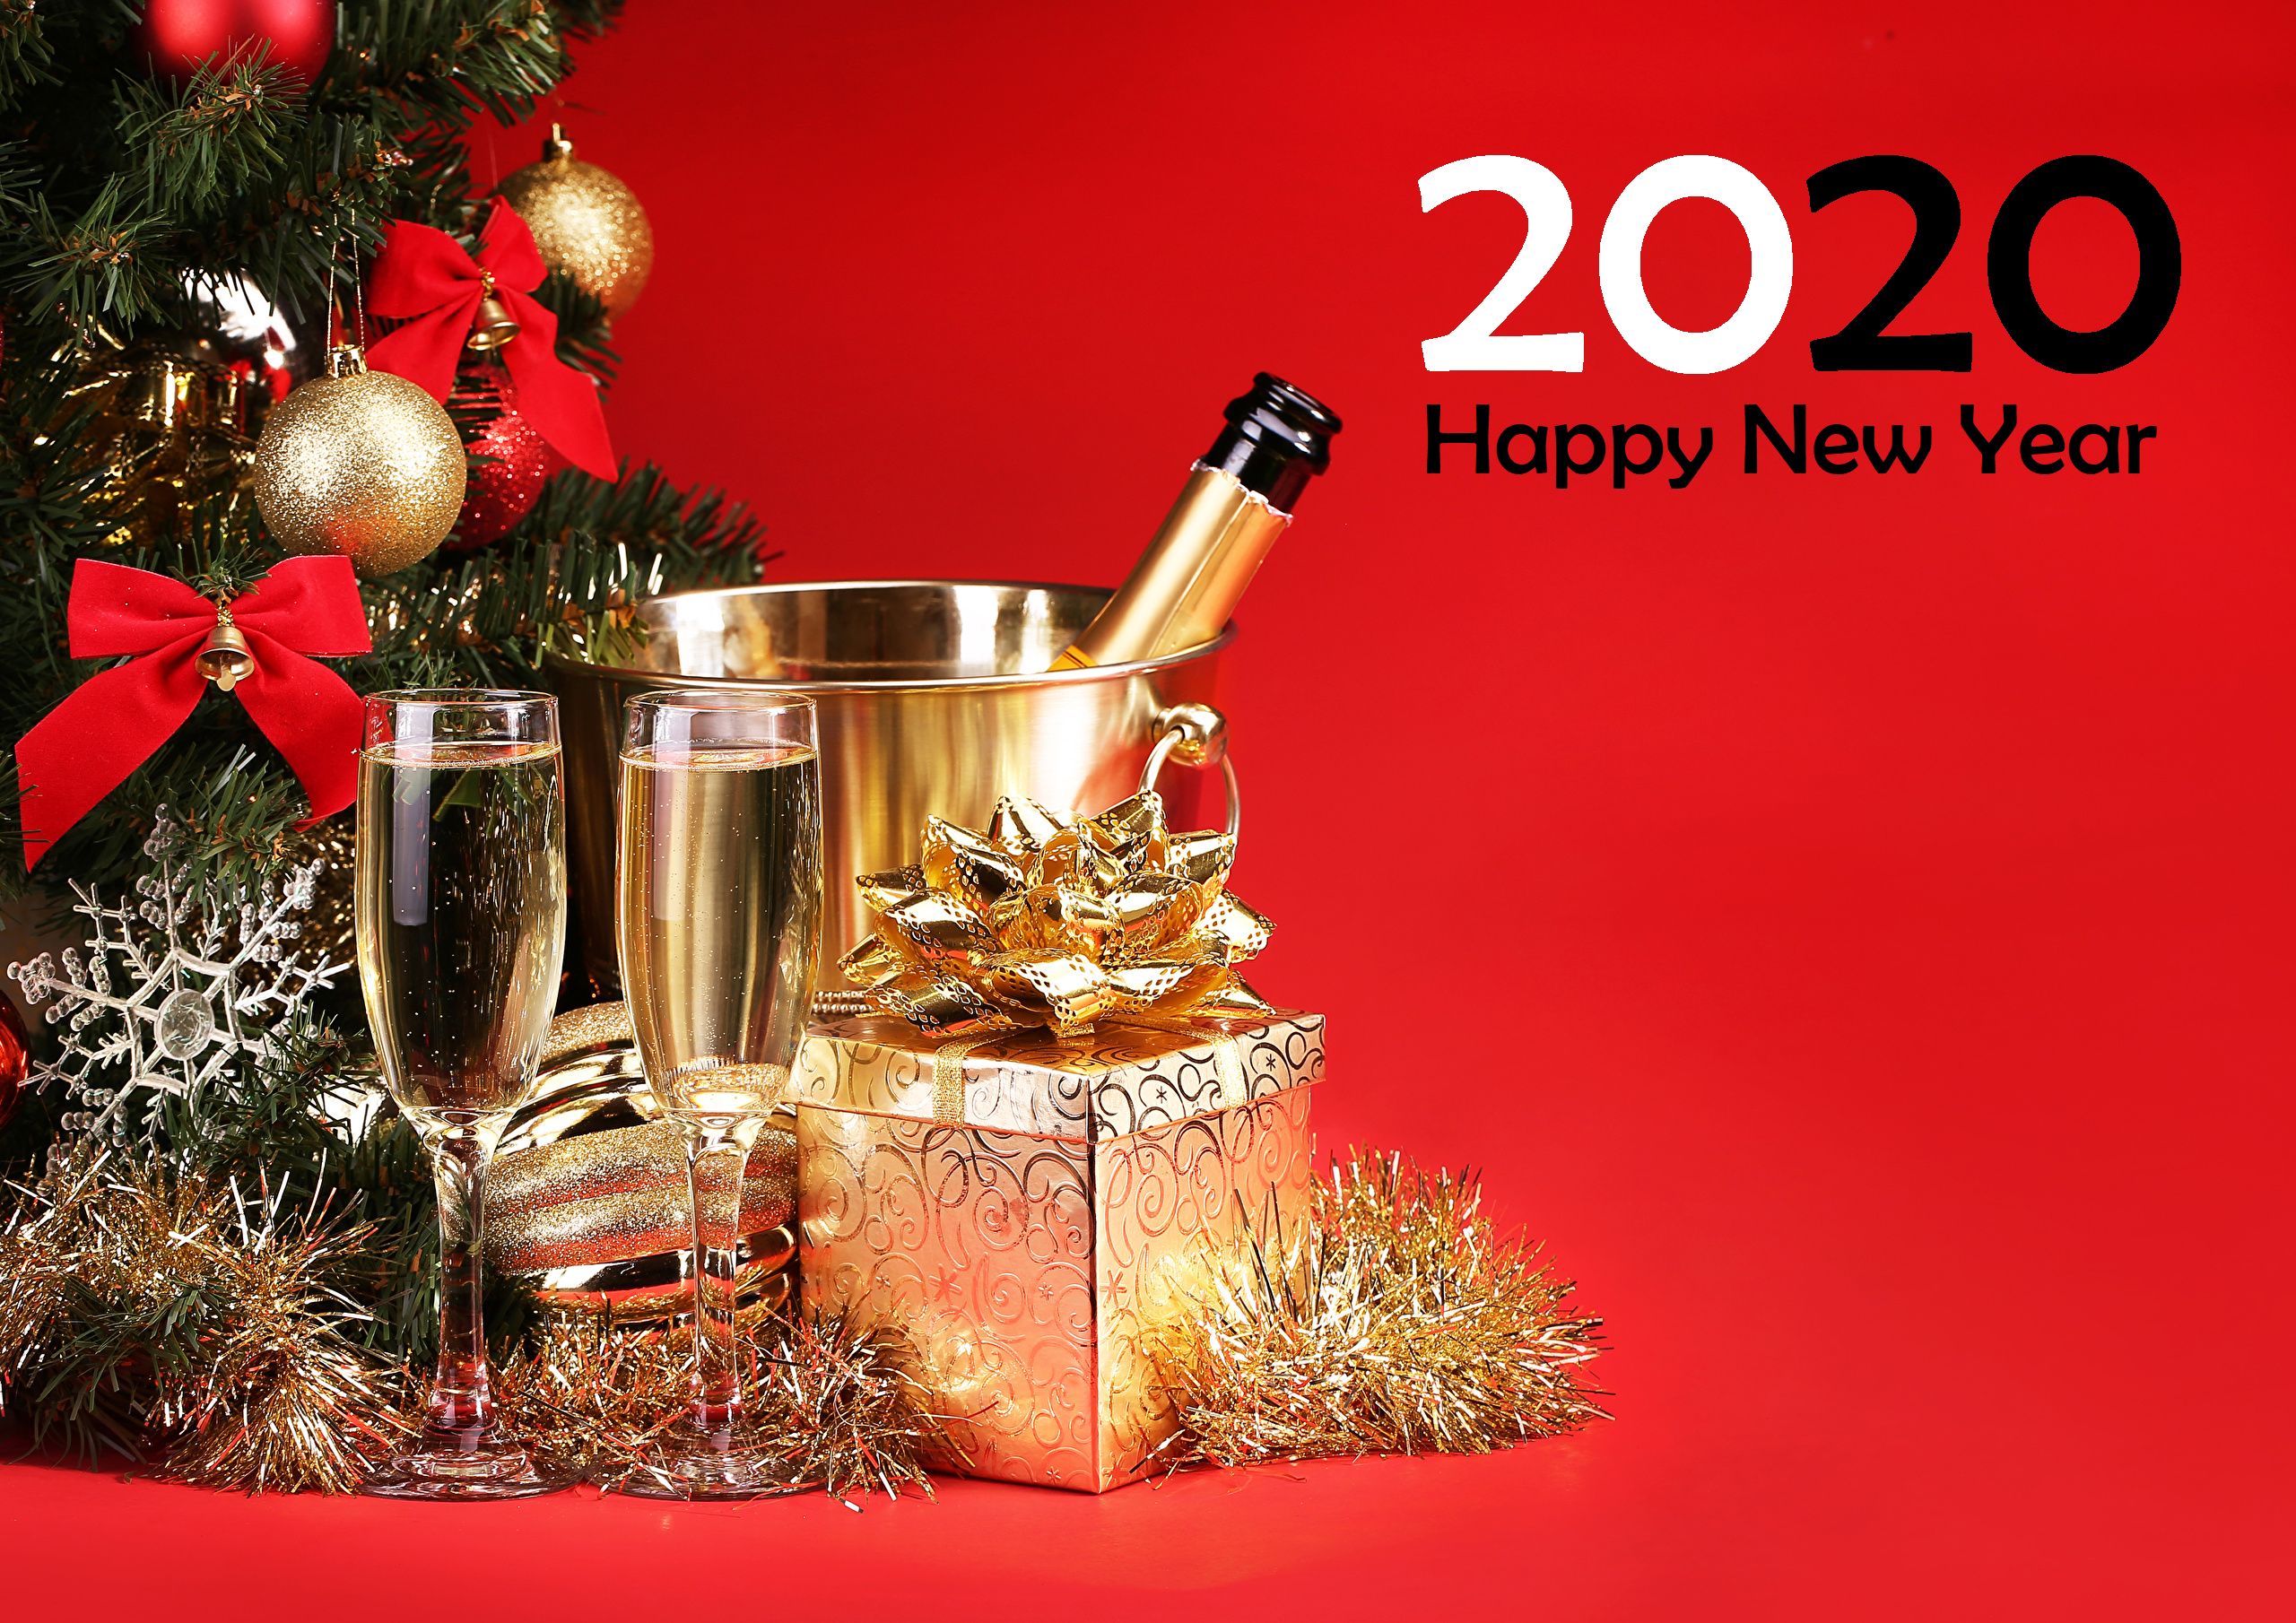 happy new year, holiday, new year 2020, champagne, christmas ornaments